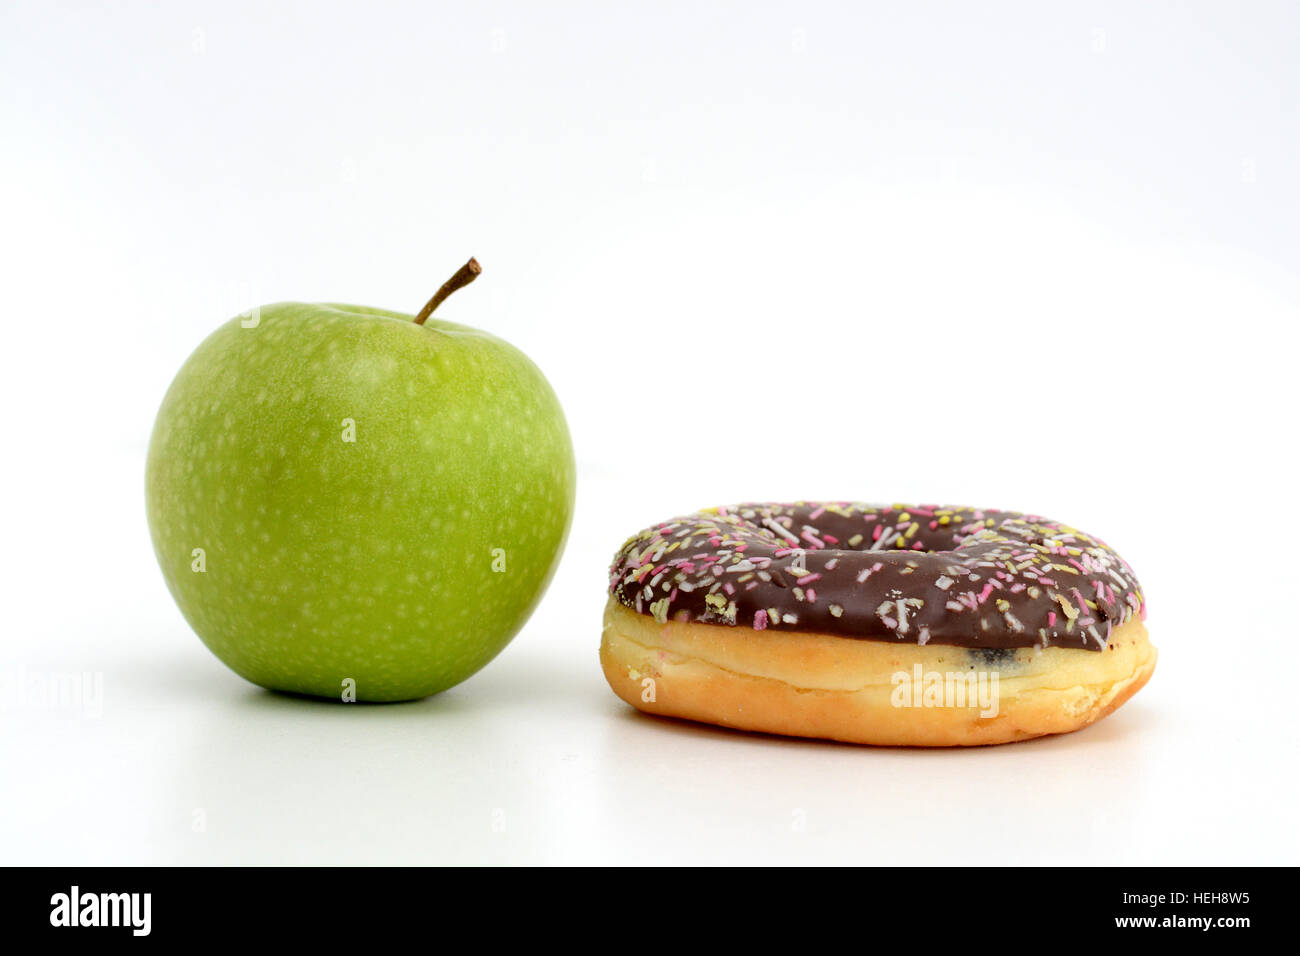 Choosing between healthy fruits and sweets. Green apple and tasty chocolate donut Stock Photo